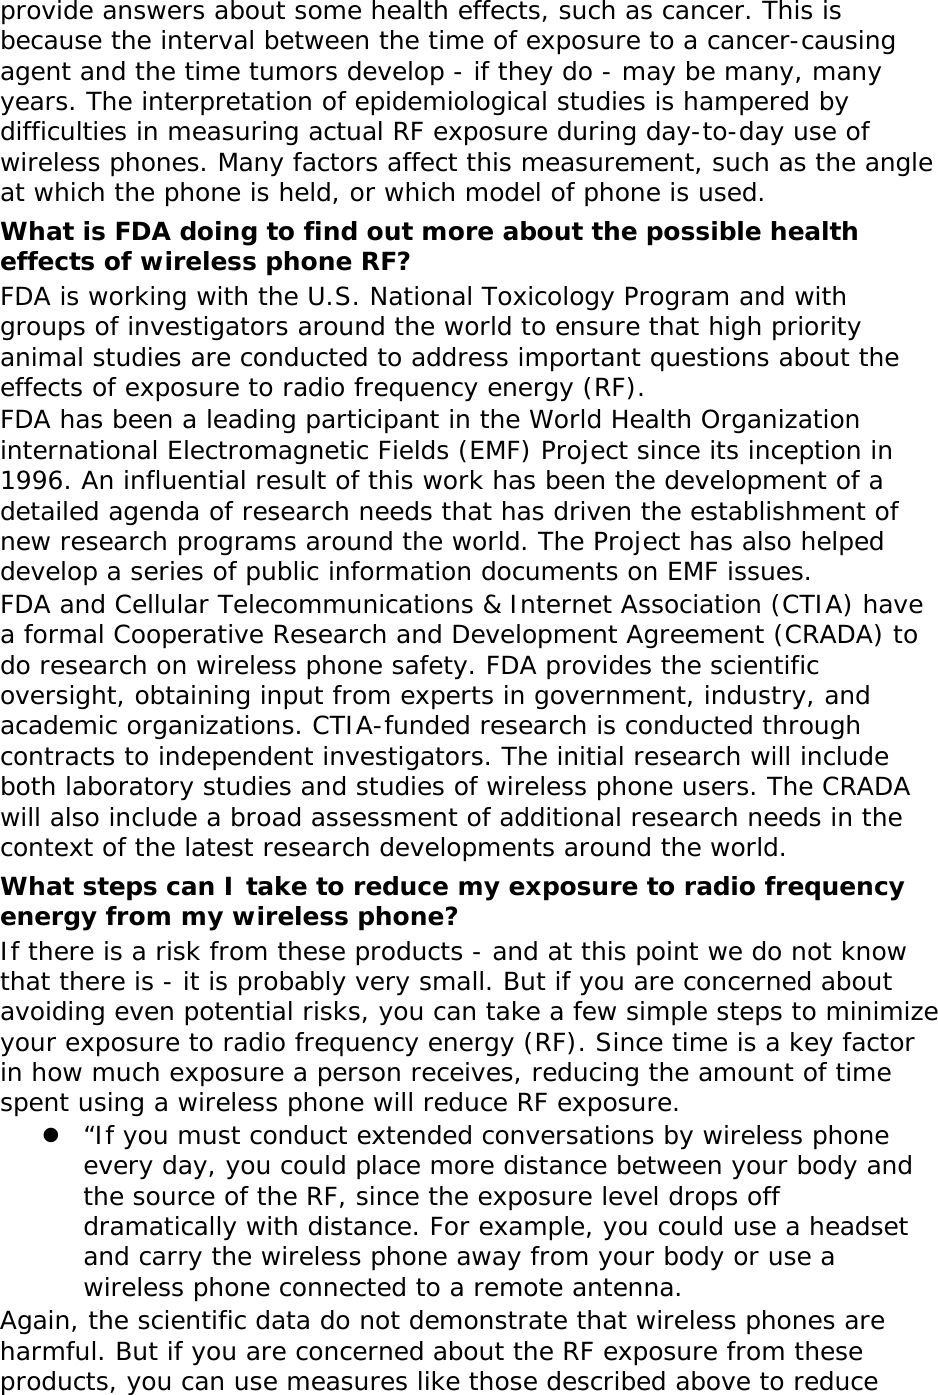 provide answers about some health effects, such as cancer. This is because the interval between the time of exposure to a cancer-causing agent and the time tumors develop - if they do - may be many, many years. The interpretation of epidemiological studies is hampered by difficulties in measuring actual RF exposure during day-to-day use of wireless phones. Many factors affect this measurement, such as the angle at which the phone is held, or which model of phone is used. What is FDA doing to find out more about the possible health effects of wireless phone RF? FDA is working with the U.S. National Toxicology Program and with groups of investigators around the world to ensure that high priority animal studies are conducted to address important questions about the effects of exposure to radio frequency energy (RF). FDA has been a leading participant in the World Health Organization international Electromagnetic Fields (EMF) Project since its inception in 1996. An influential result of this work has been the development of a detailed agenda of research needs that has driven the establishment of new research programs around the world. The Project has also helped develop a series of public information documents on EMF issues. FDA and Cellular Telecommunications &amp; Internet Association (CTIA) have a formal Cooperative Research and Development Agreement (CRADA) to do research on wireless phone safety. FDA provides the scientific oversight, obtaining input from experts in government, industry, and academic organizations. CTIA-funded research is conducted through contracts to independent investigators. The initial research will include both laboratory studies and studies of wireless phone users. The CRADA will also include a broad assessment of additional research needs in the context of the latest research developments around the world. What steps can I take to reduce my exposure to radio frequency energy from my wireless phone? If there is a risk from these products - and at this point we do not know that there is - it is probably very small. But if you are concerned about avoiding even potential risks, you can take a few simple steps to minimize your exposure to radio frequency energy (RF). Since time is a key factor in how much exposure a person receives, reducing the amount of time spent using a wireless phone will reduce RF exposure.  “If you must conduct extended conversations by wireless phone every day, you could place more distance between your body and the source of the RF, since the exposure level drops off dramatically with distance. For example, you could use a headset and carry the wireless phone away from your body or use a wireless phone connected to a remote antenna. Again, the scientific data do not demonstrate that wireless phones are harmful. But if you are concerned about the RF exposure from these products, you can use measures like those described above to reduce 